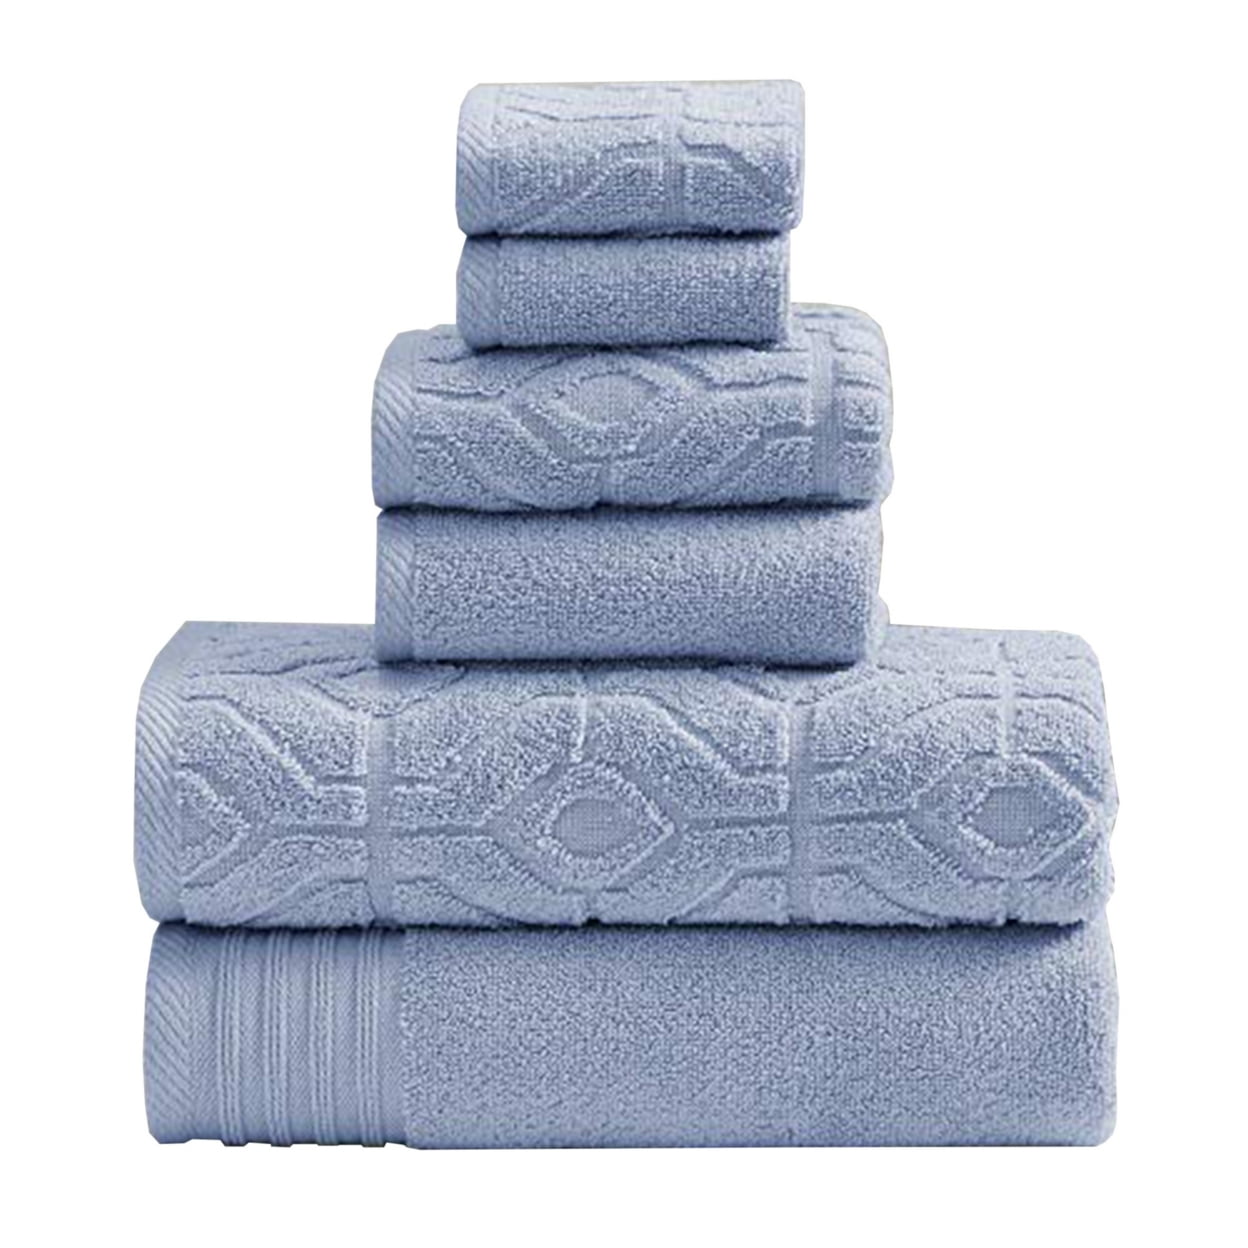 Picture of The Urban Port BM222856 Granada Yarn Dyed Towel Set with Jacquard Stripe Pattern, Blue - 6 Piece